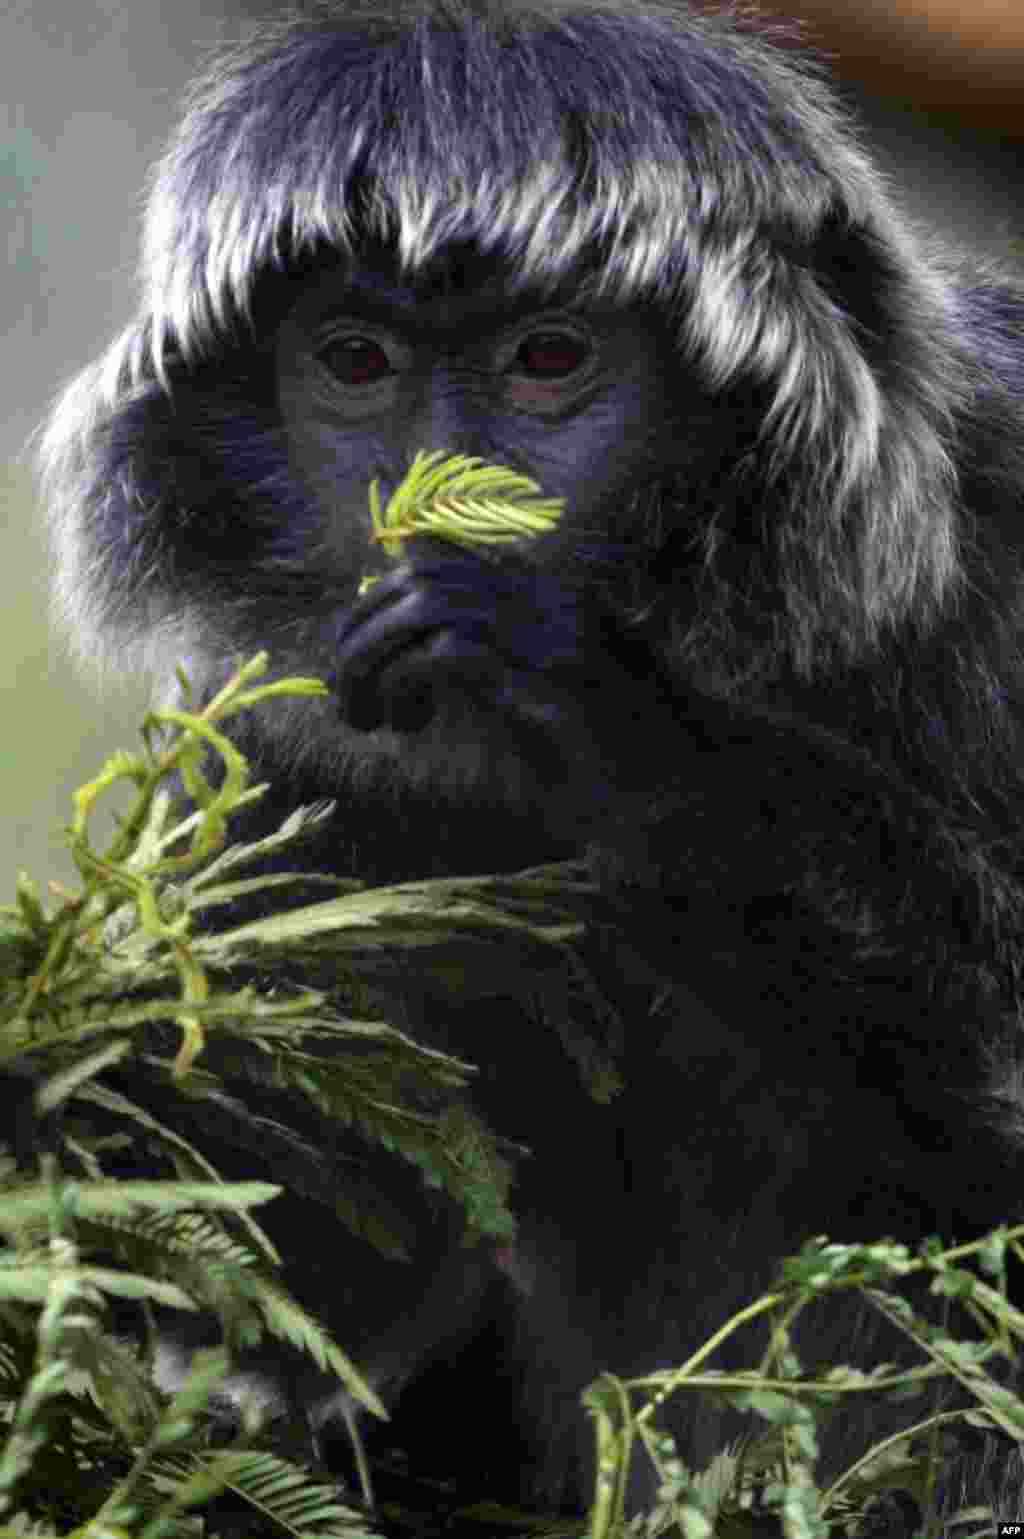 A rare Javan langur eats leaves upon arrival at a quarantine area of Javan Langur Center outside Malang, in eastern Java island to aclimatize in preparation for release into a natural habitat in two months.